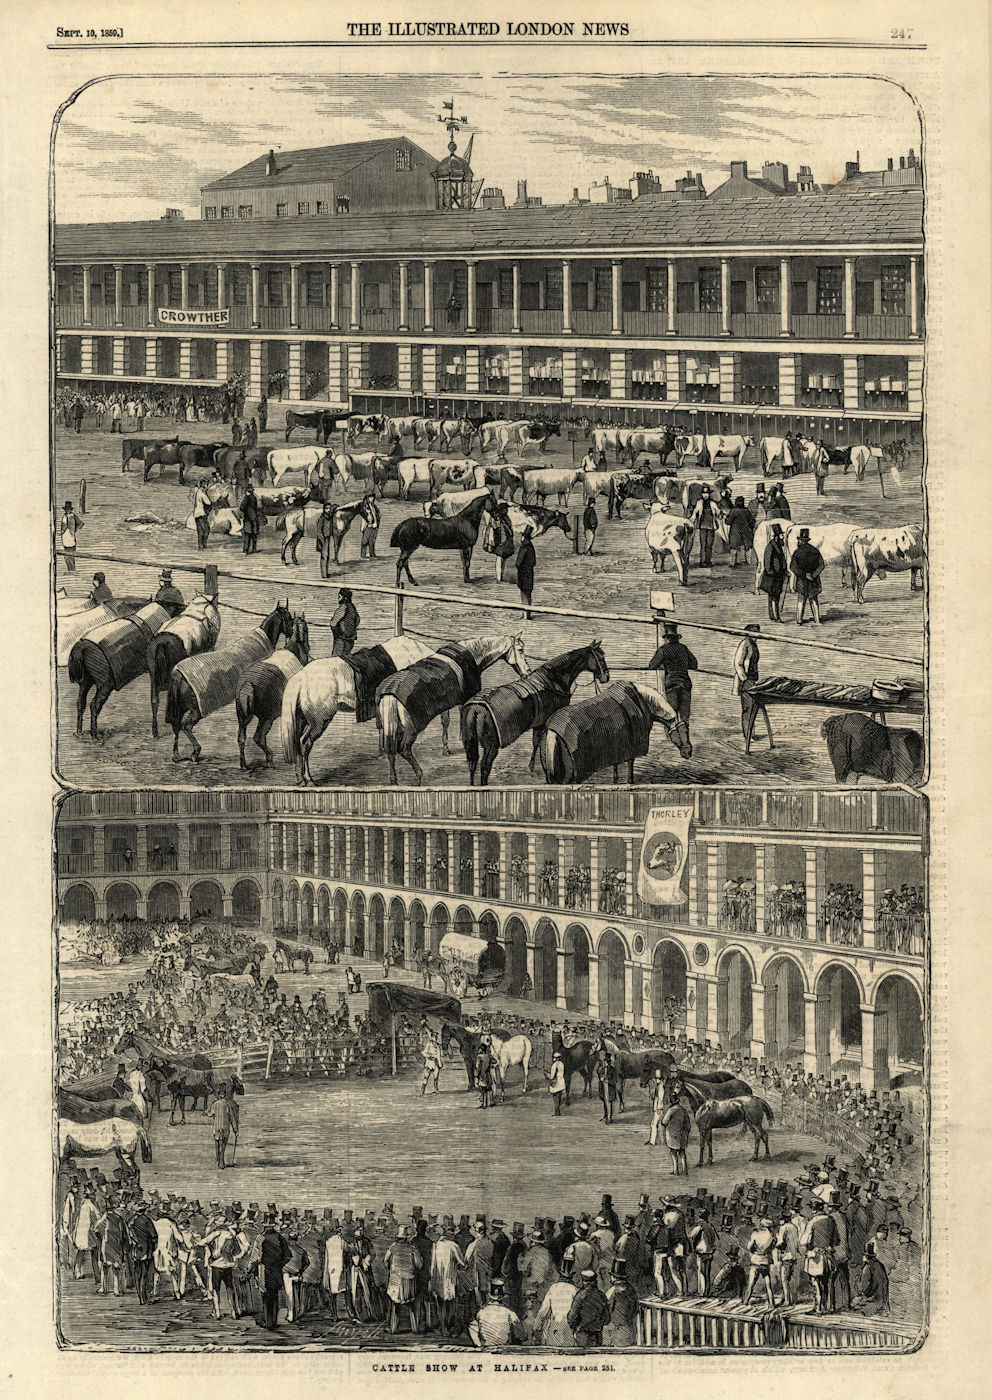 Associate Product Cattle show at Halifax. Yorkshire. Cows 1859 old antique vintage print picture